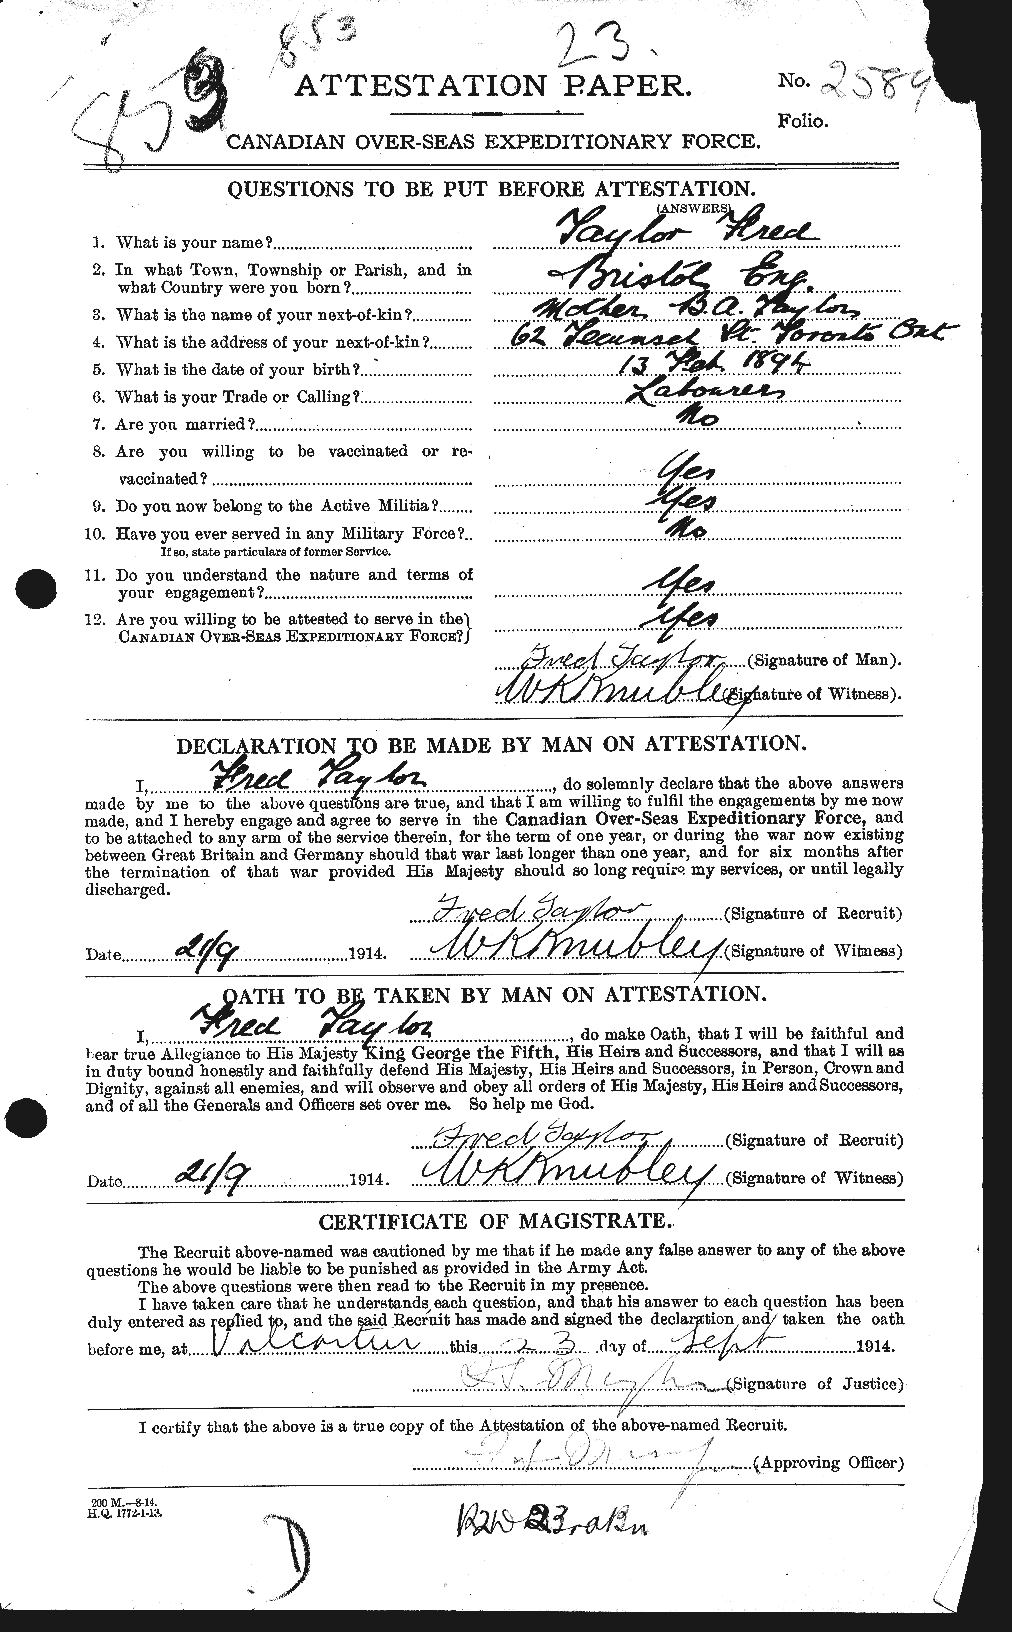 Personnel Records of the First World War - CEF 625738a